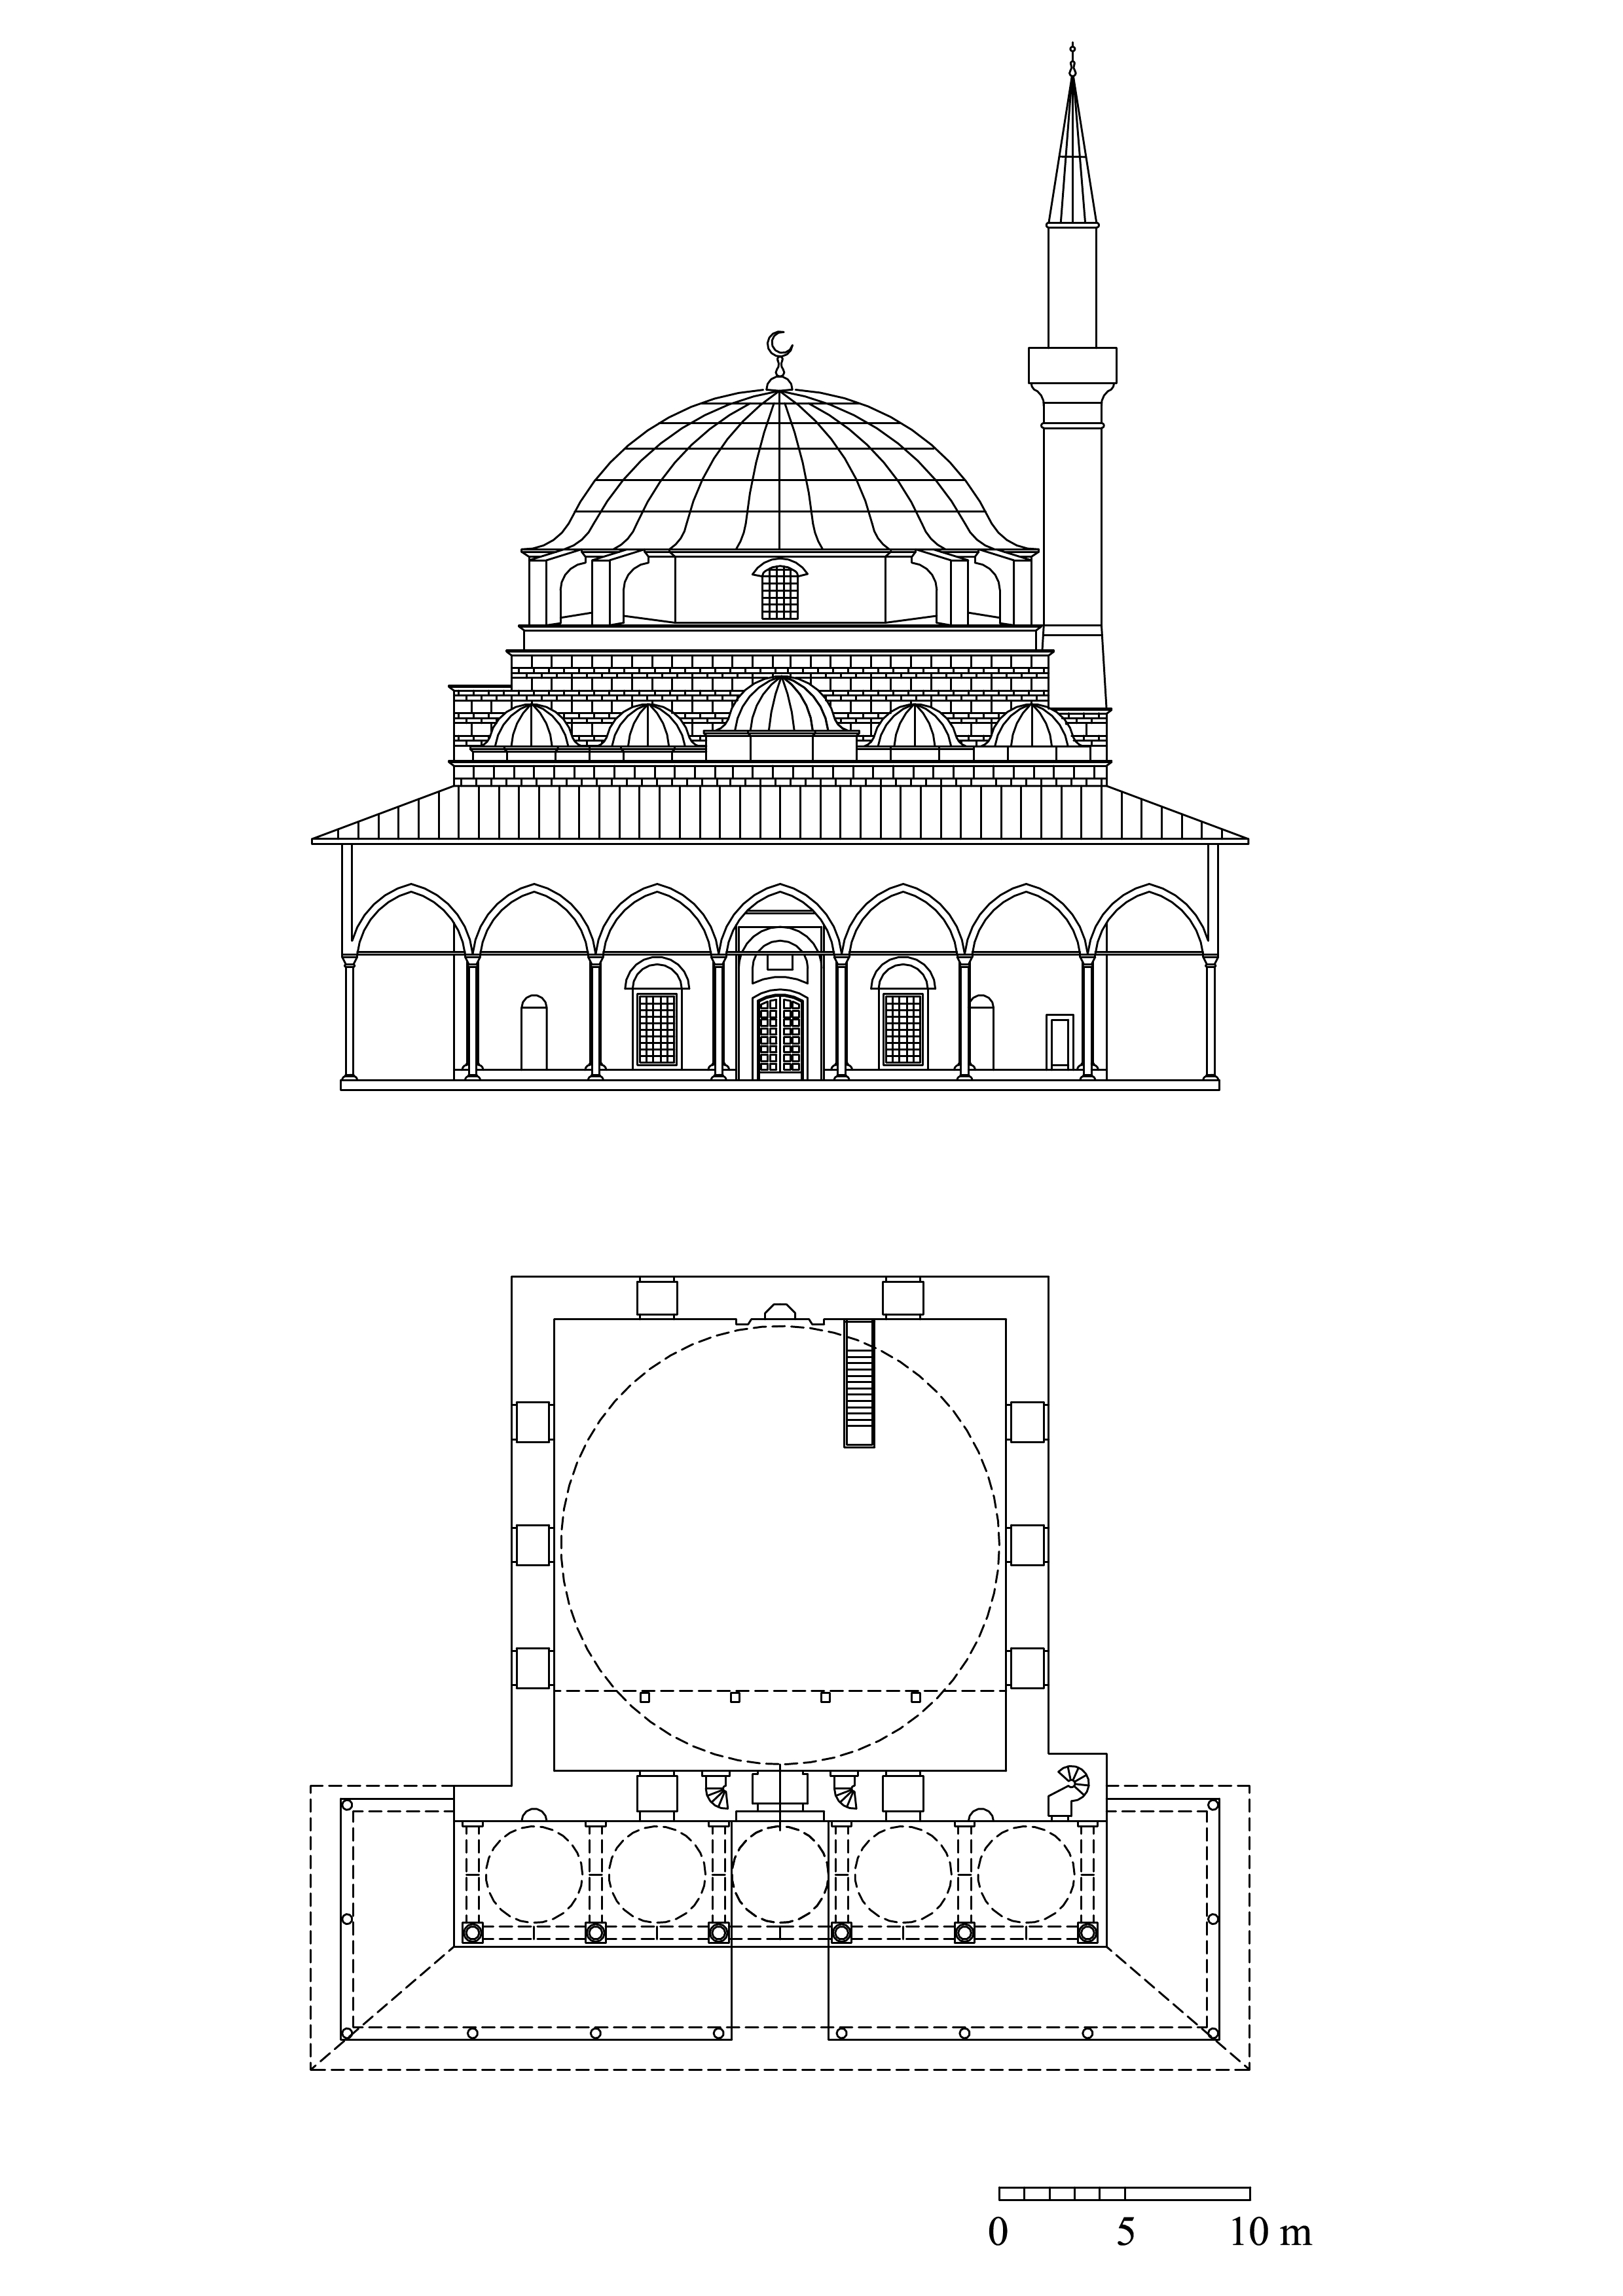 Osman Shah Camii - Floor plan and elevation showing the missing double portico (hypothetical reconstruction)